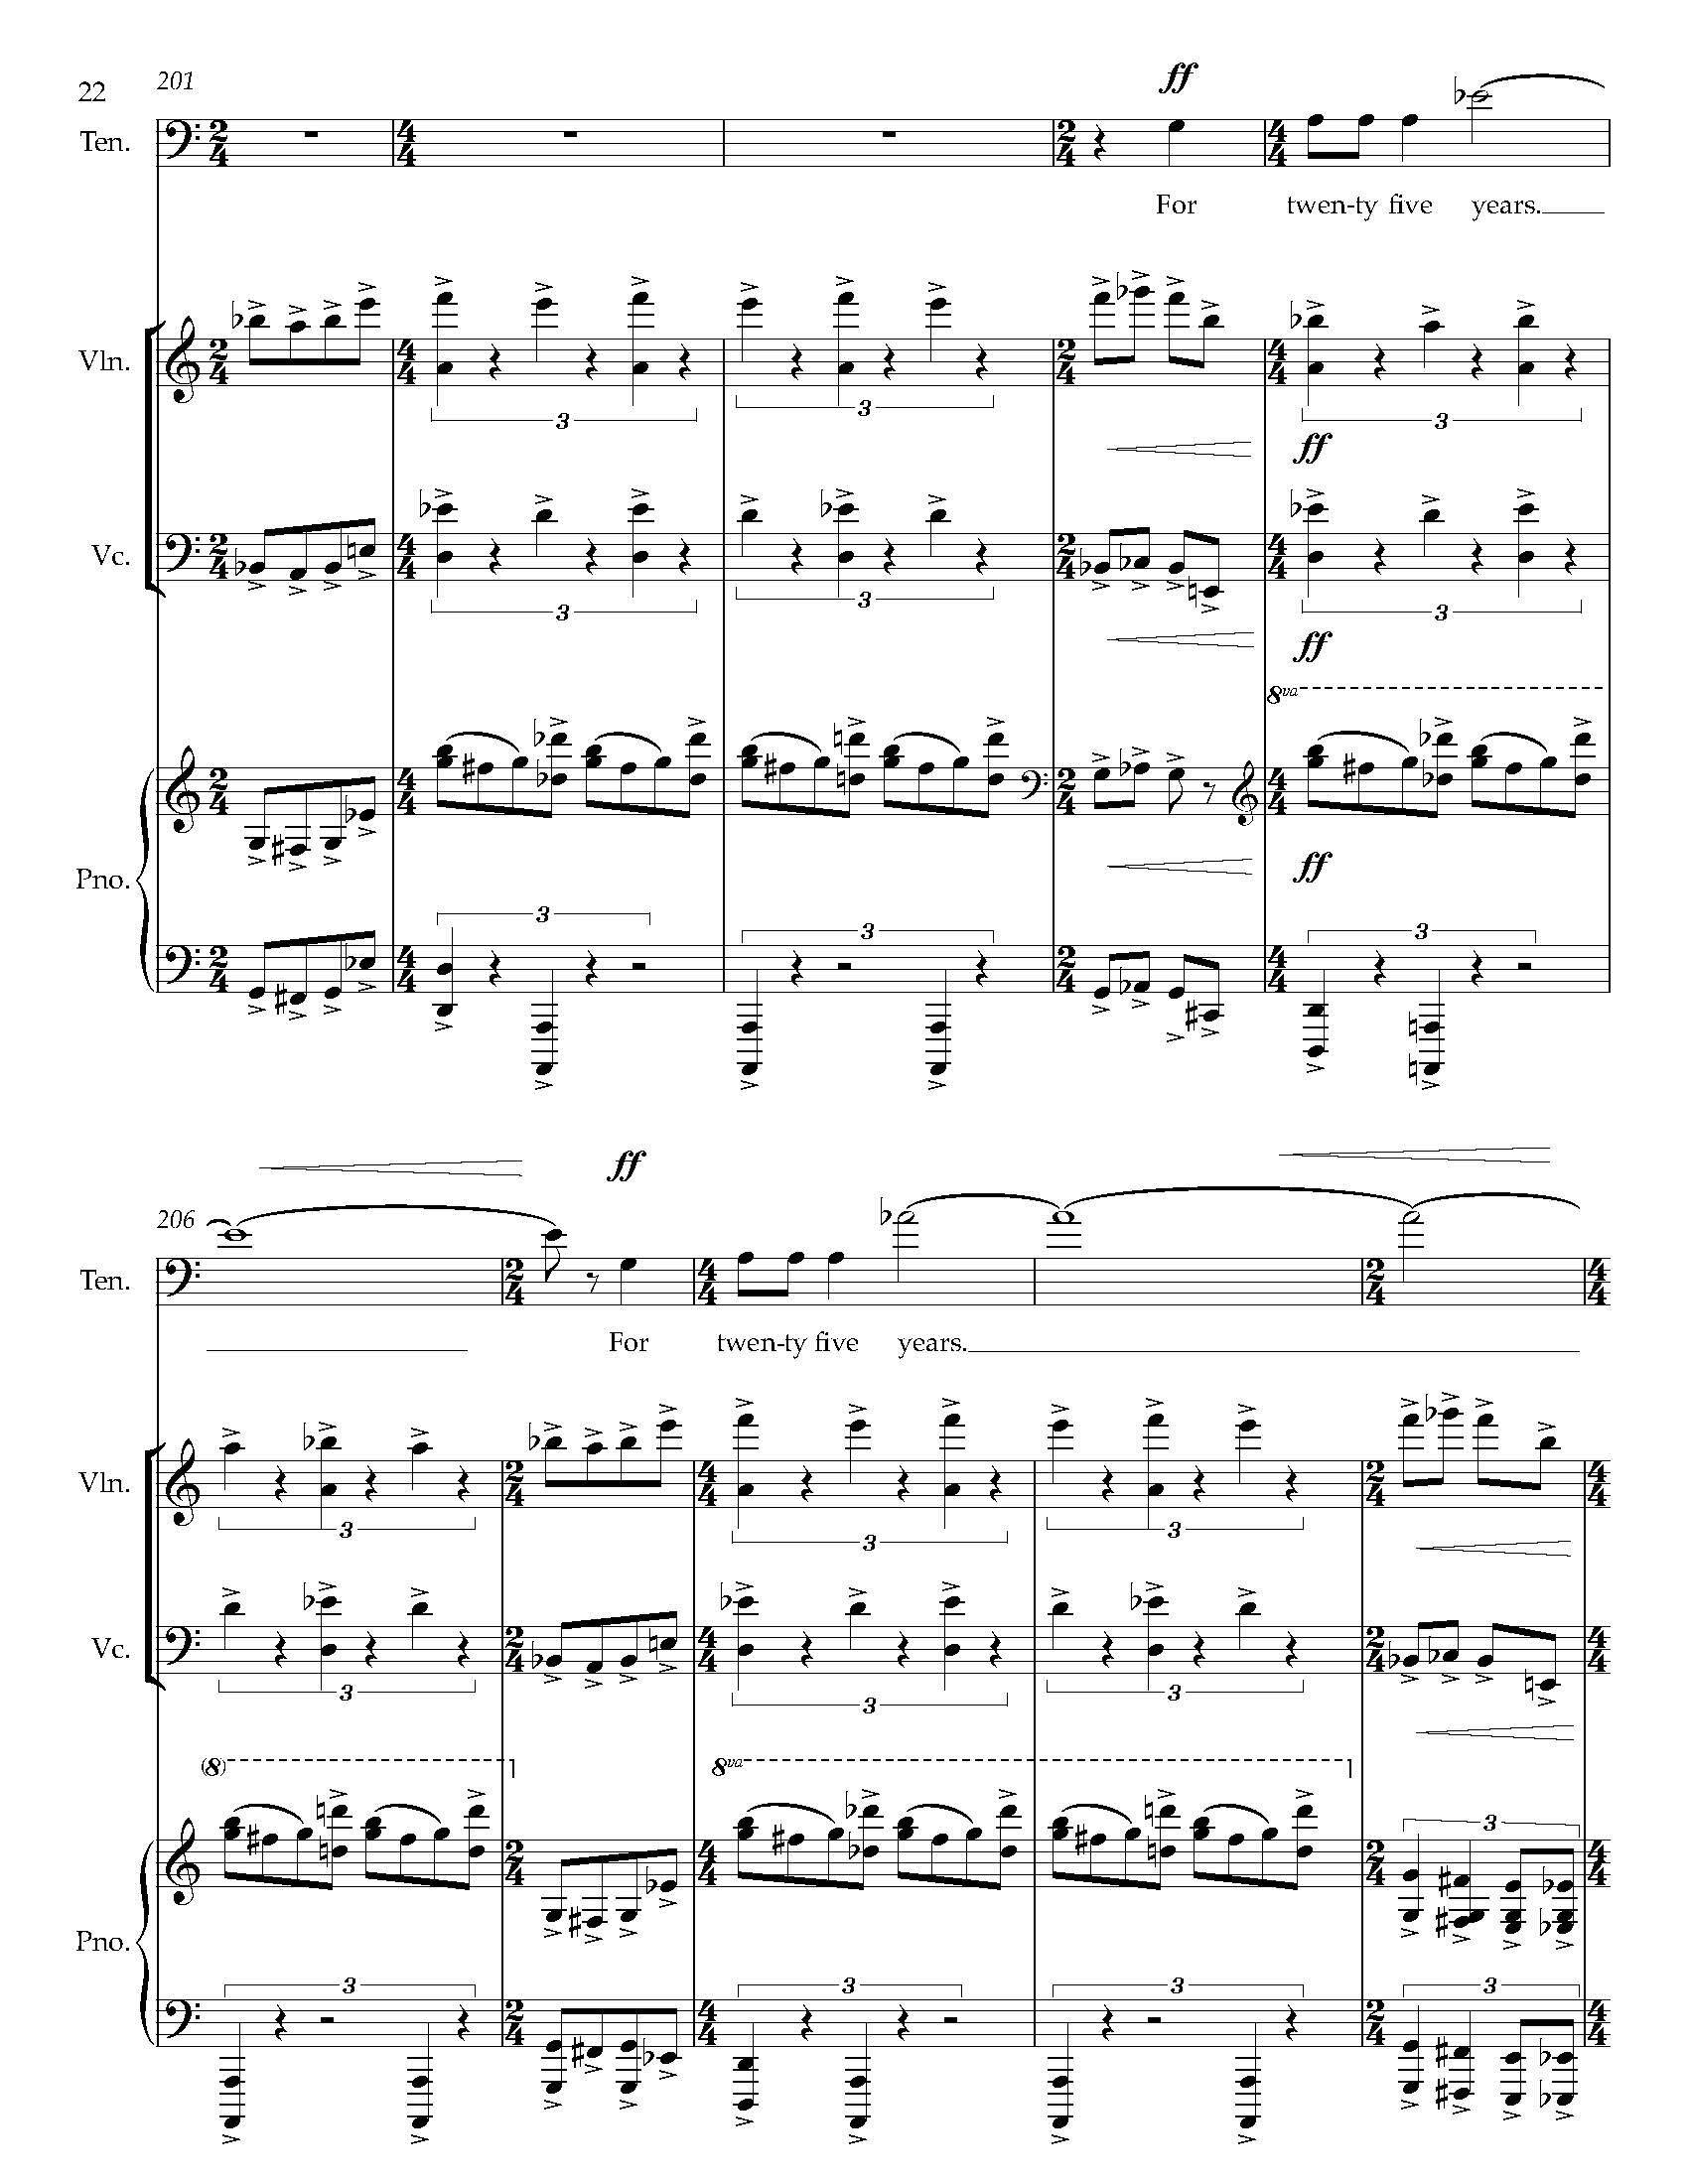 Gursky Songs - Complete Score_Page_30.jpg